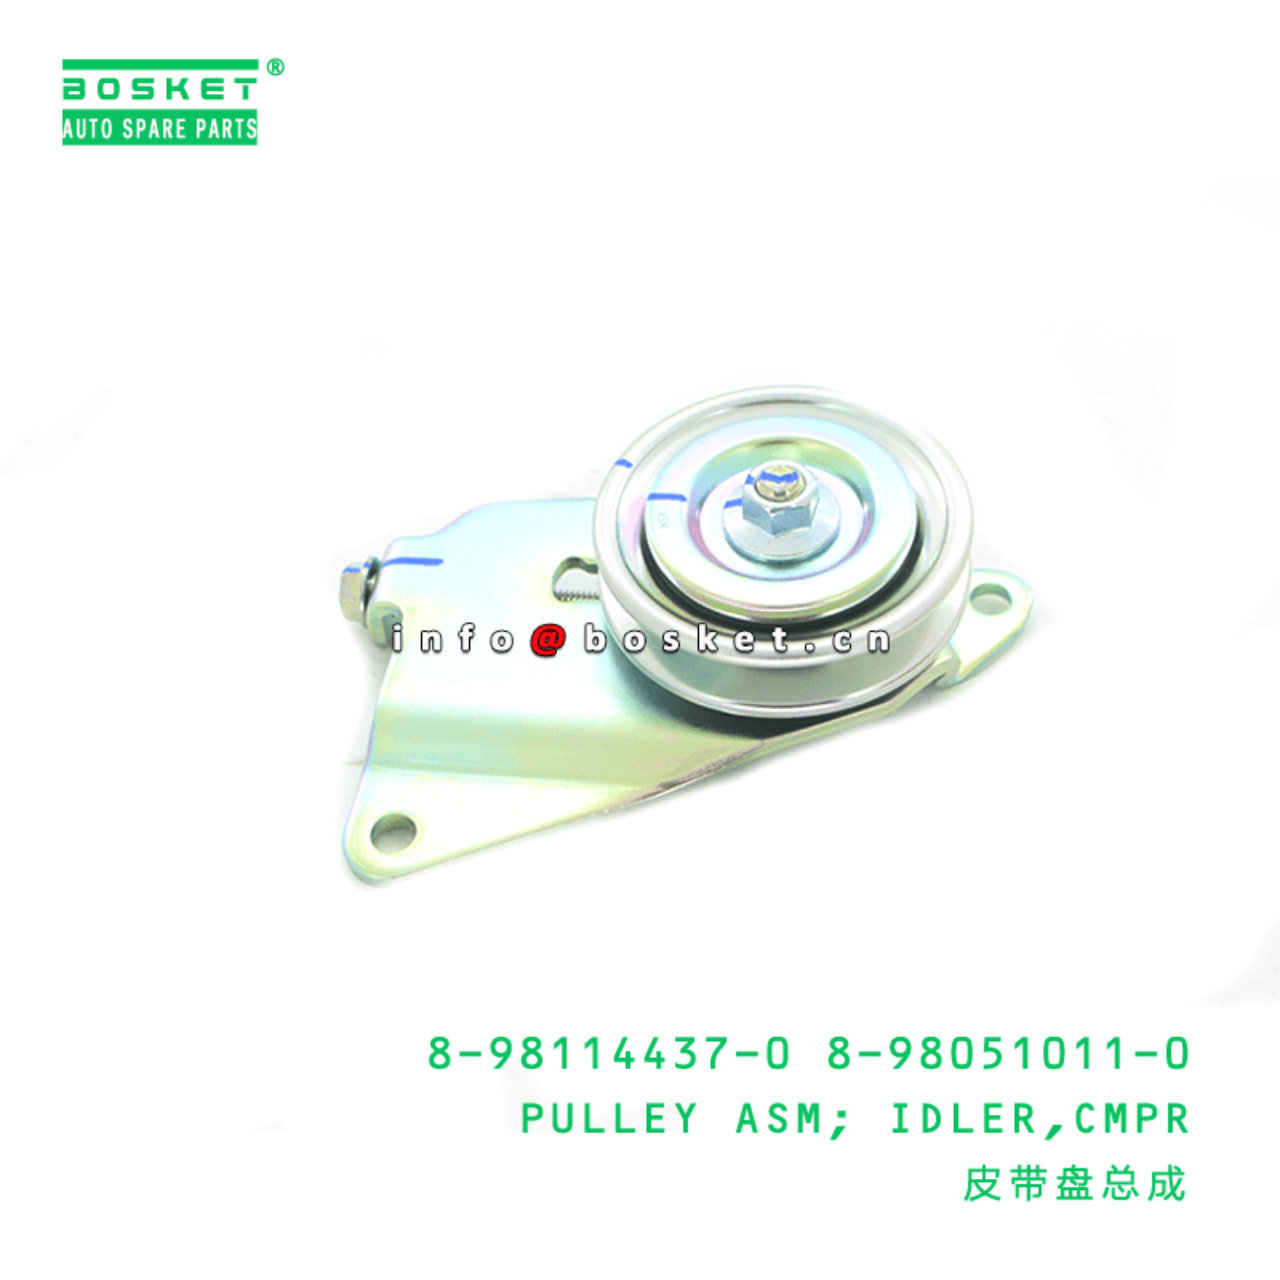 8-98114437-0 8-98051011-0 Compressor Idler Pulley Assembly 8981144370 8980510110 Suitable for ISUZU 